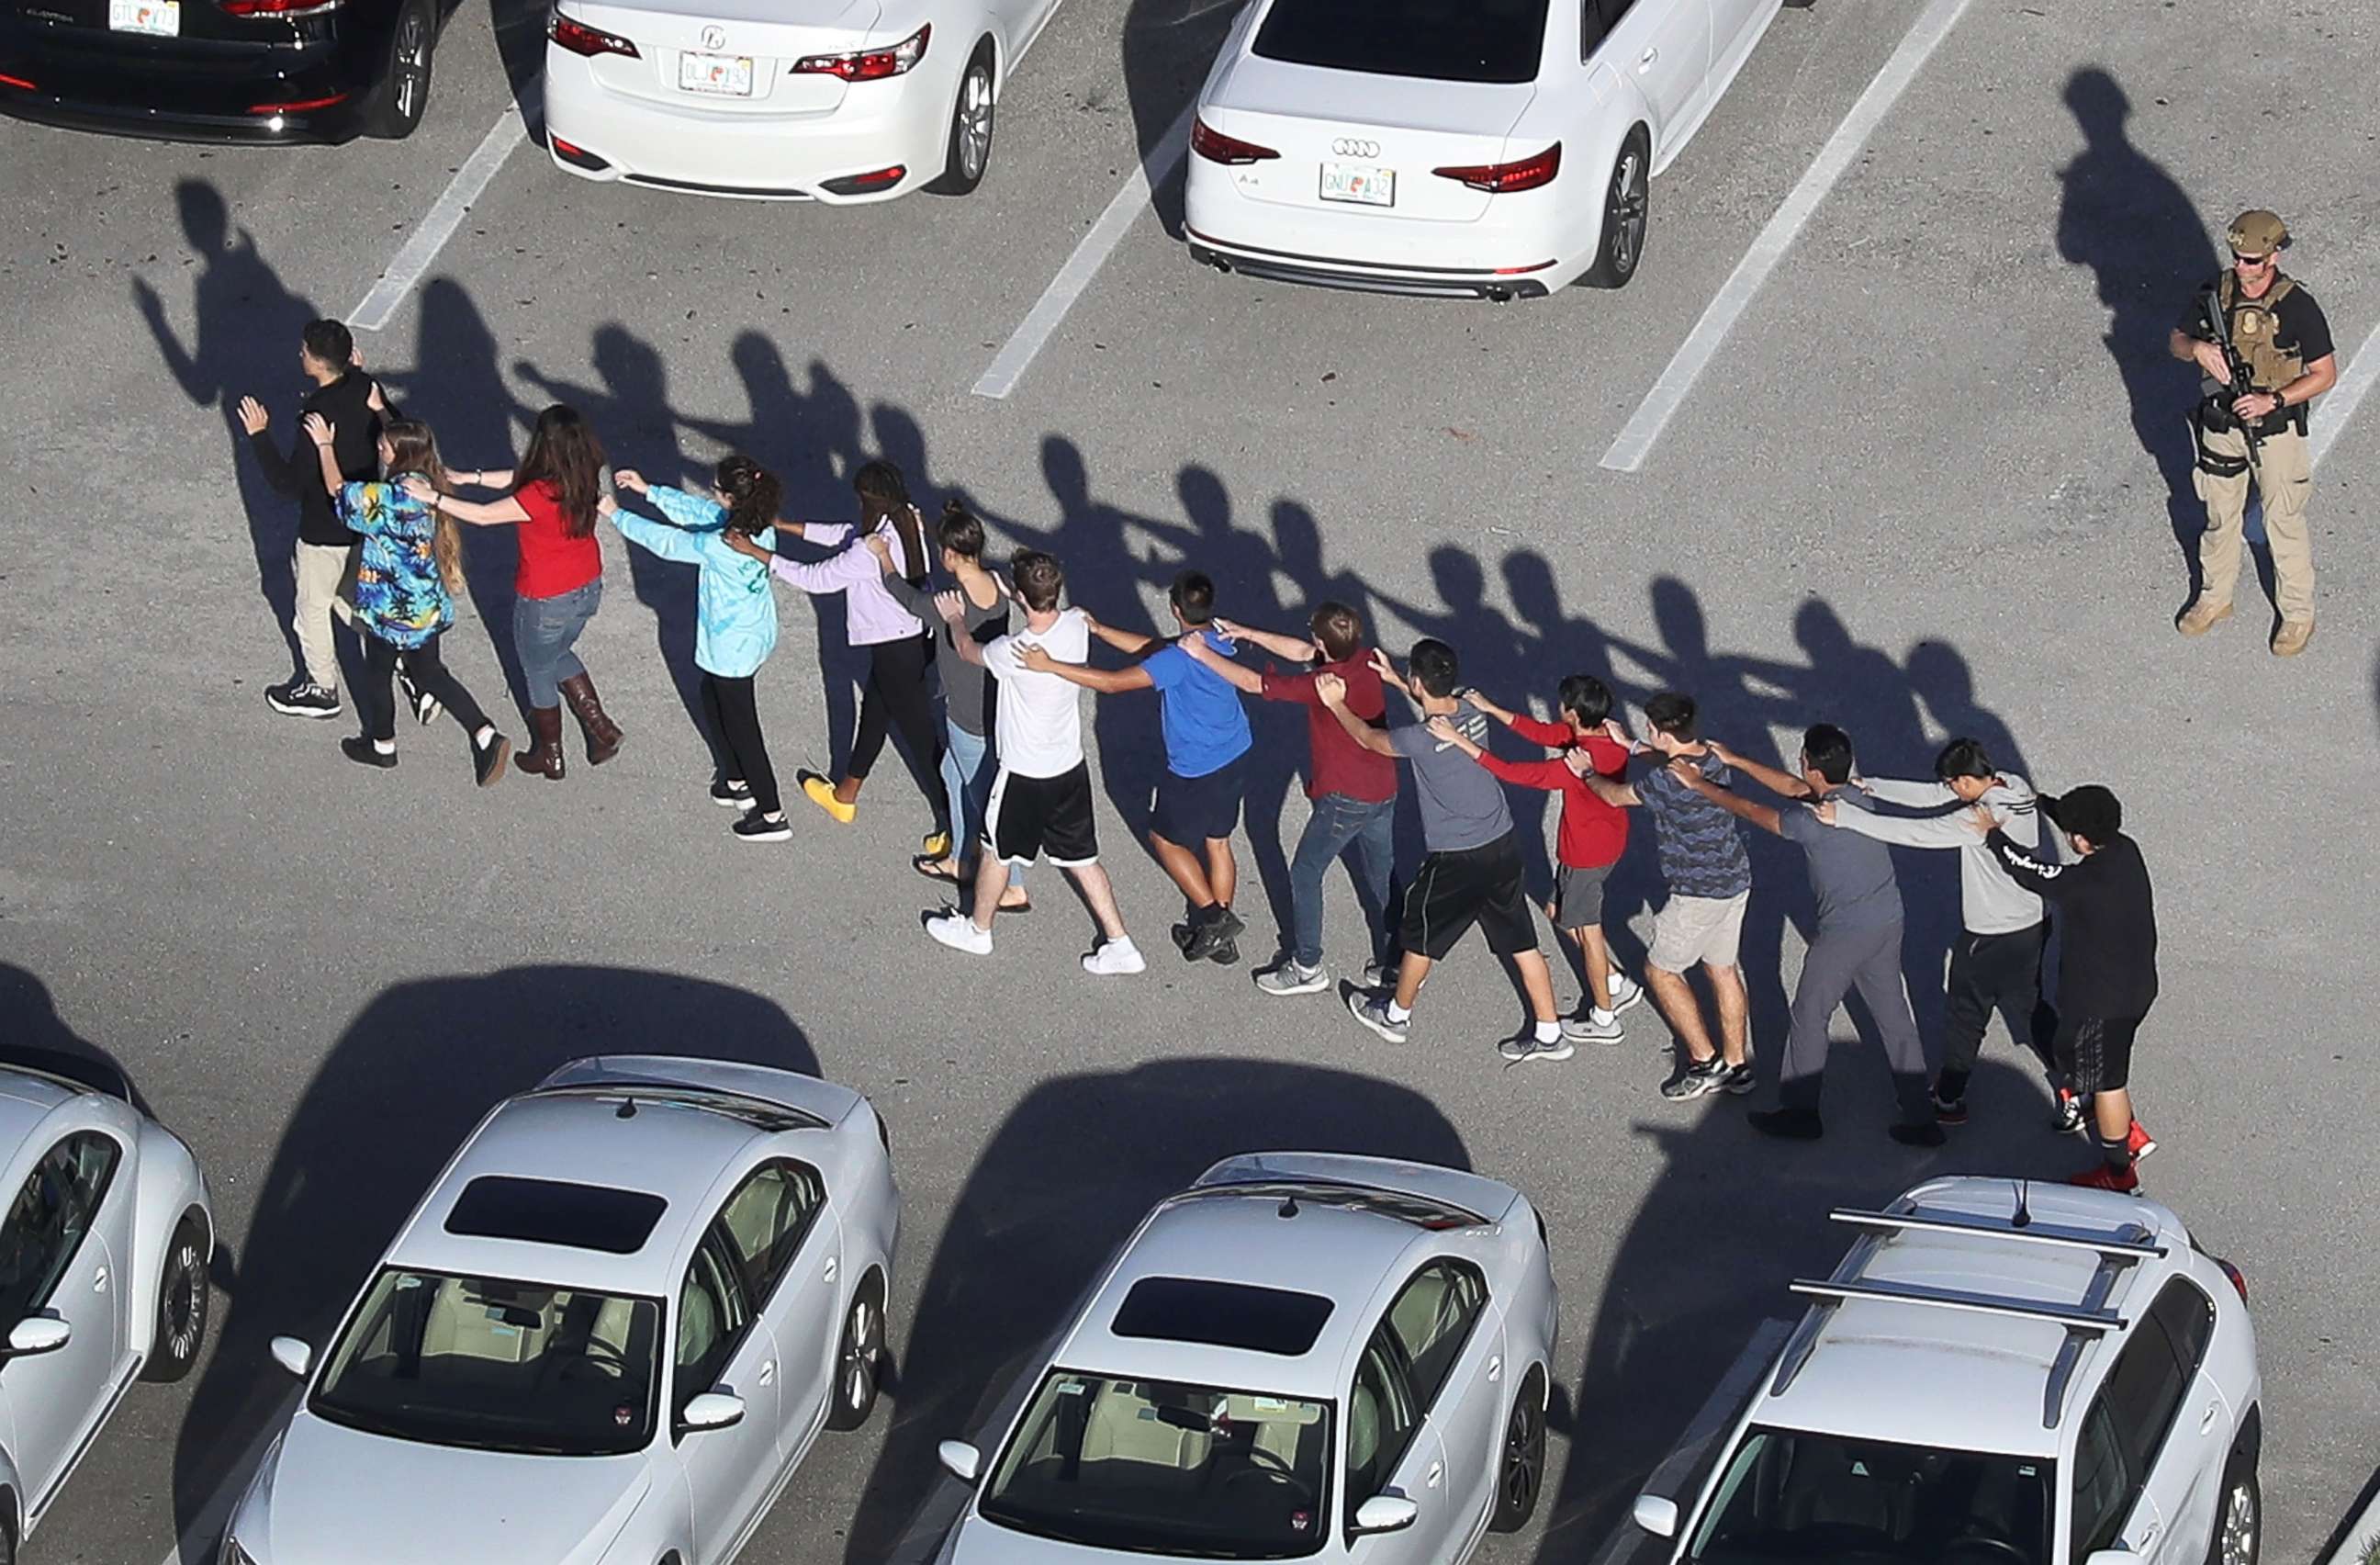 PHOTO: People are brought out of the Marjory Stoneman Douglas High School after a shooting at the school that killed and injured multiple people on Feb. 14, 2018, in Parkland, Fla.